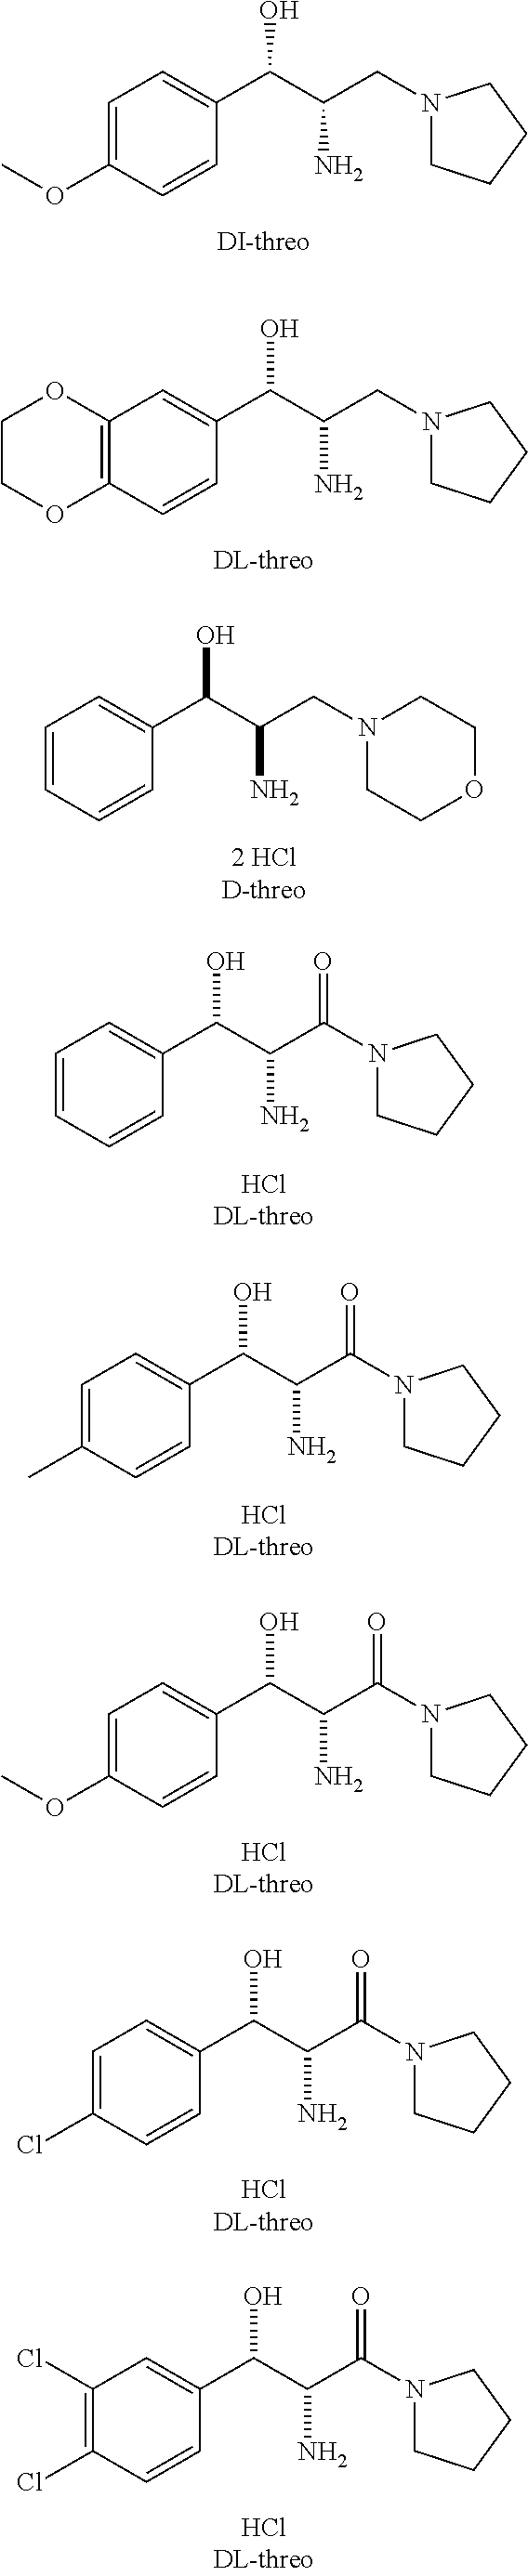 Methods of using as analgesics 1-benzyl-1-hydroxy-2, 3-diamino-propyl amines, 3-benzyl-3-hyrdroxy-2-amino-propionic acid amides and related compounds